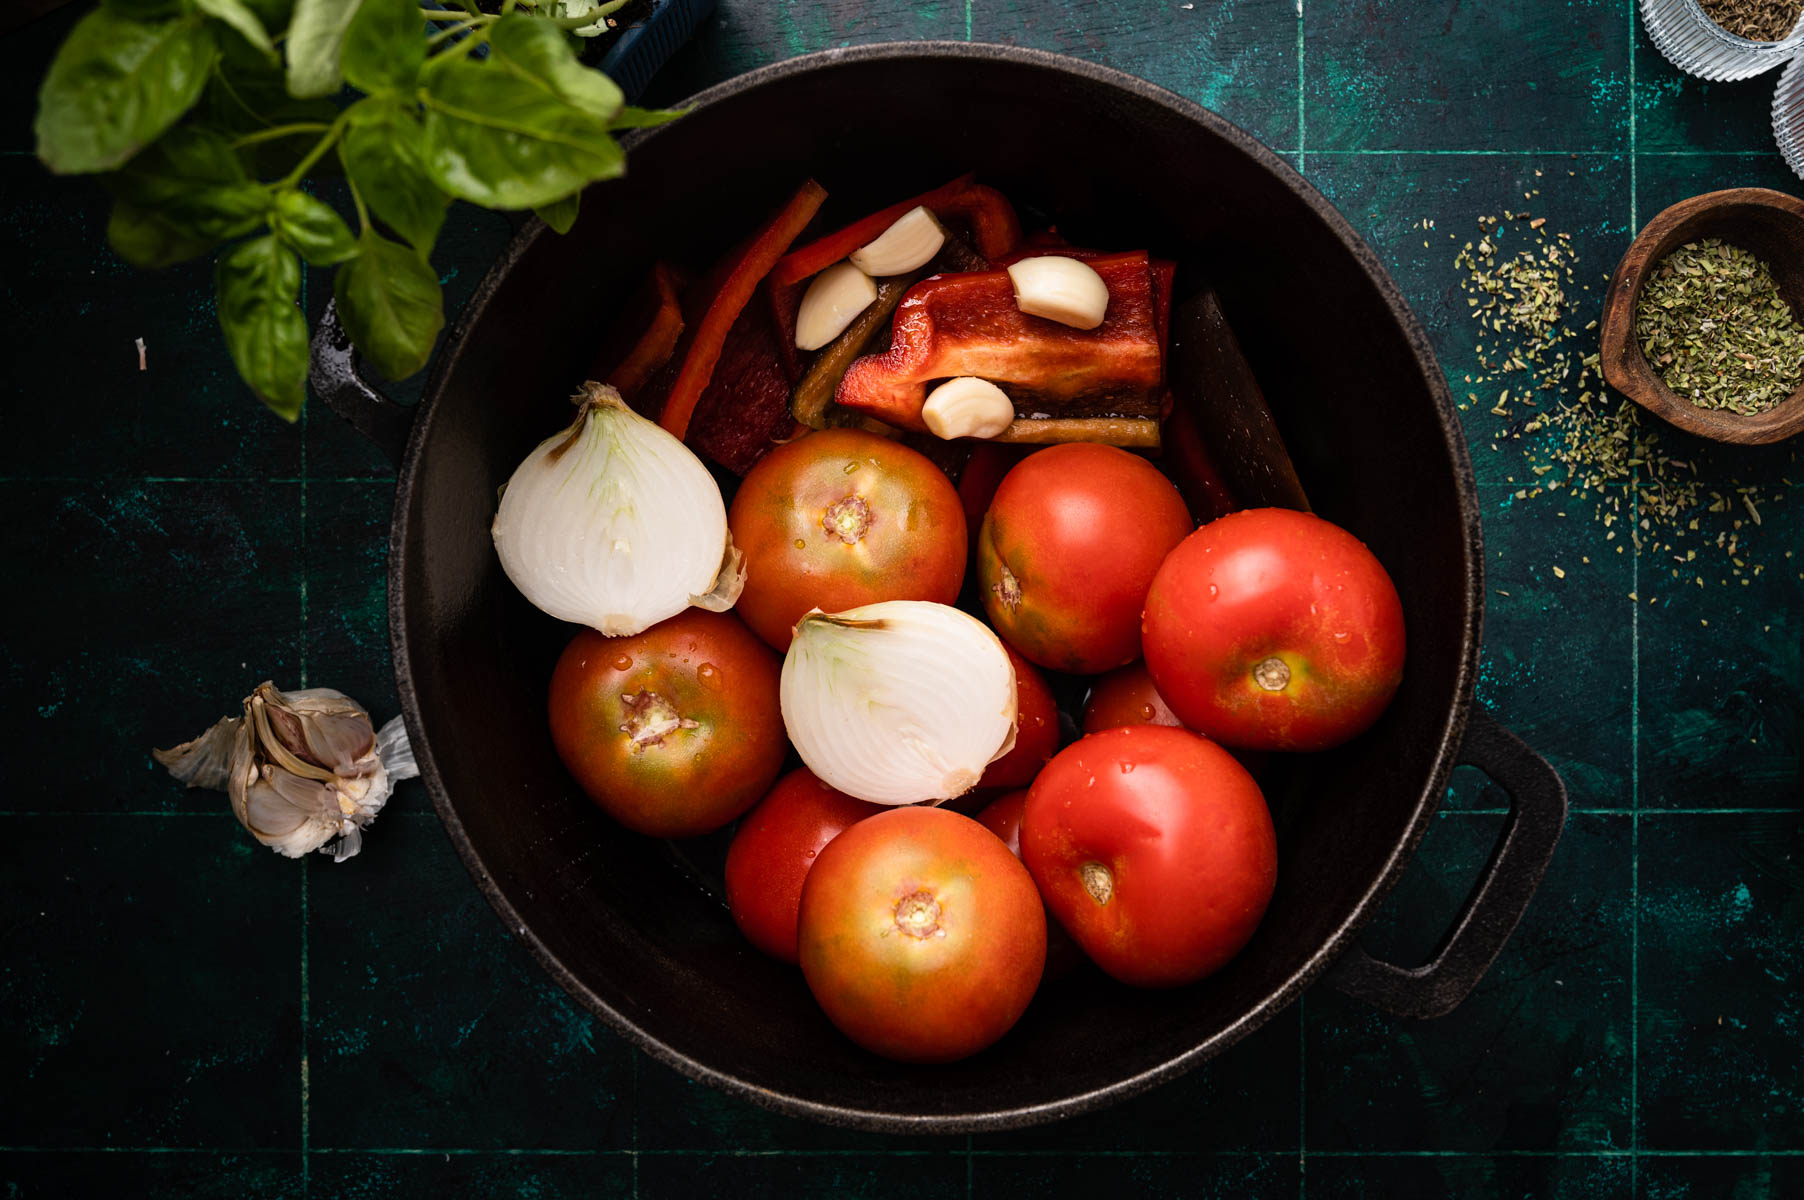 A cast iron skillet containing fresh tomatoes, onions, garlic, and red peppers, ready for cooking, on a dark, textured surface.